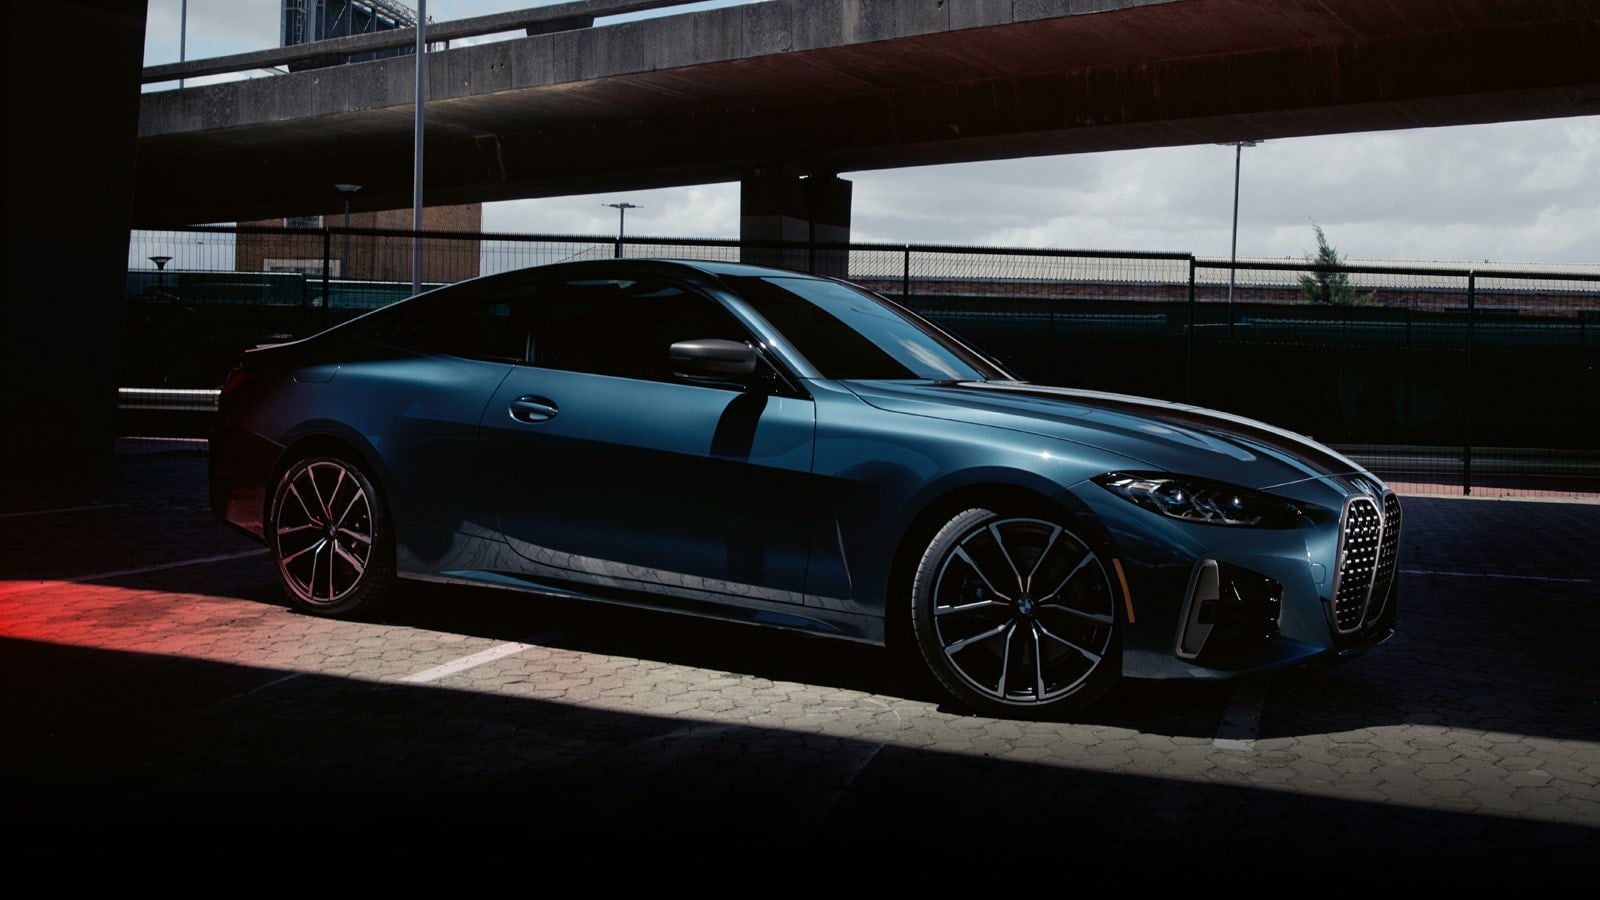 Sculpted rear wheel arches accentuate the muscular proportions of the 2021 BMW 4 Series Coupe.